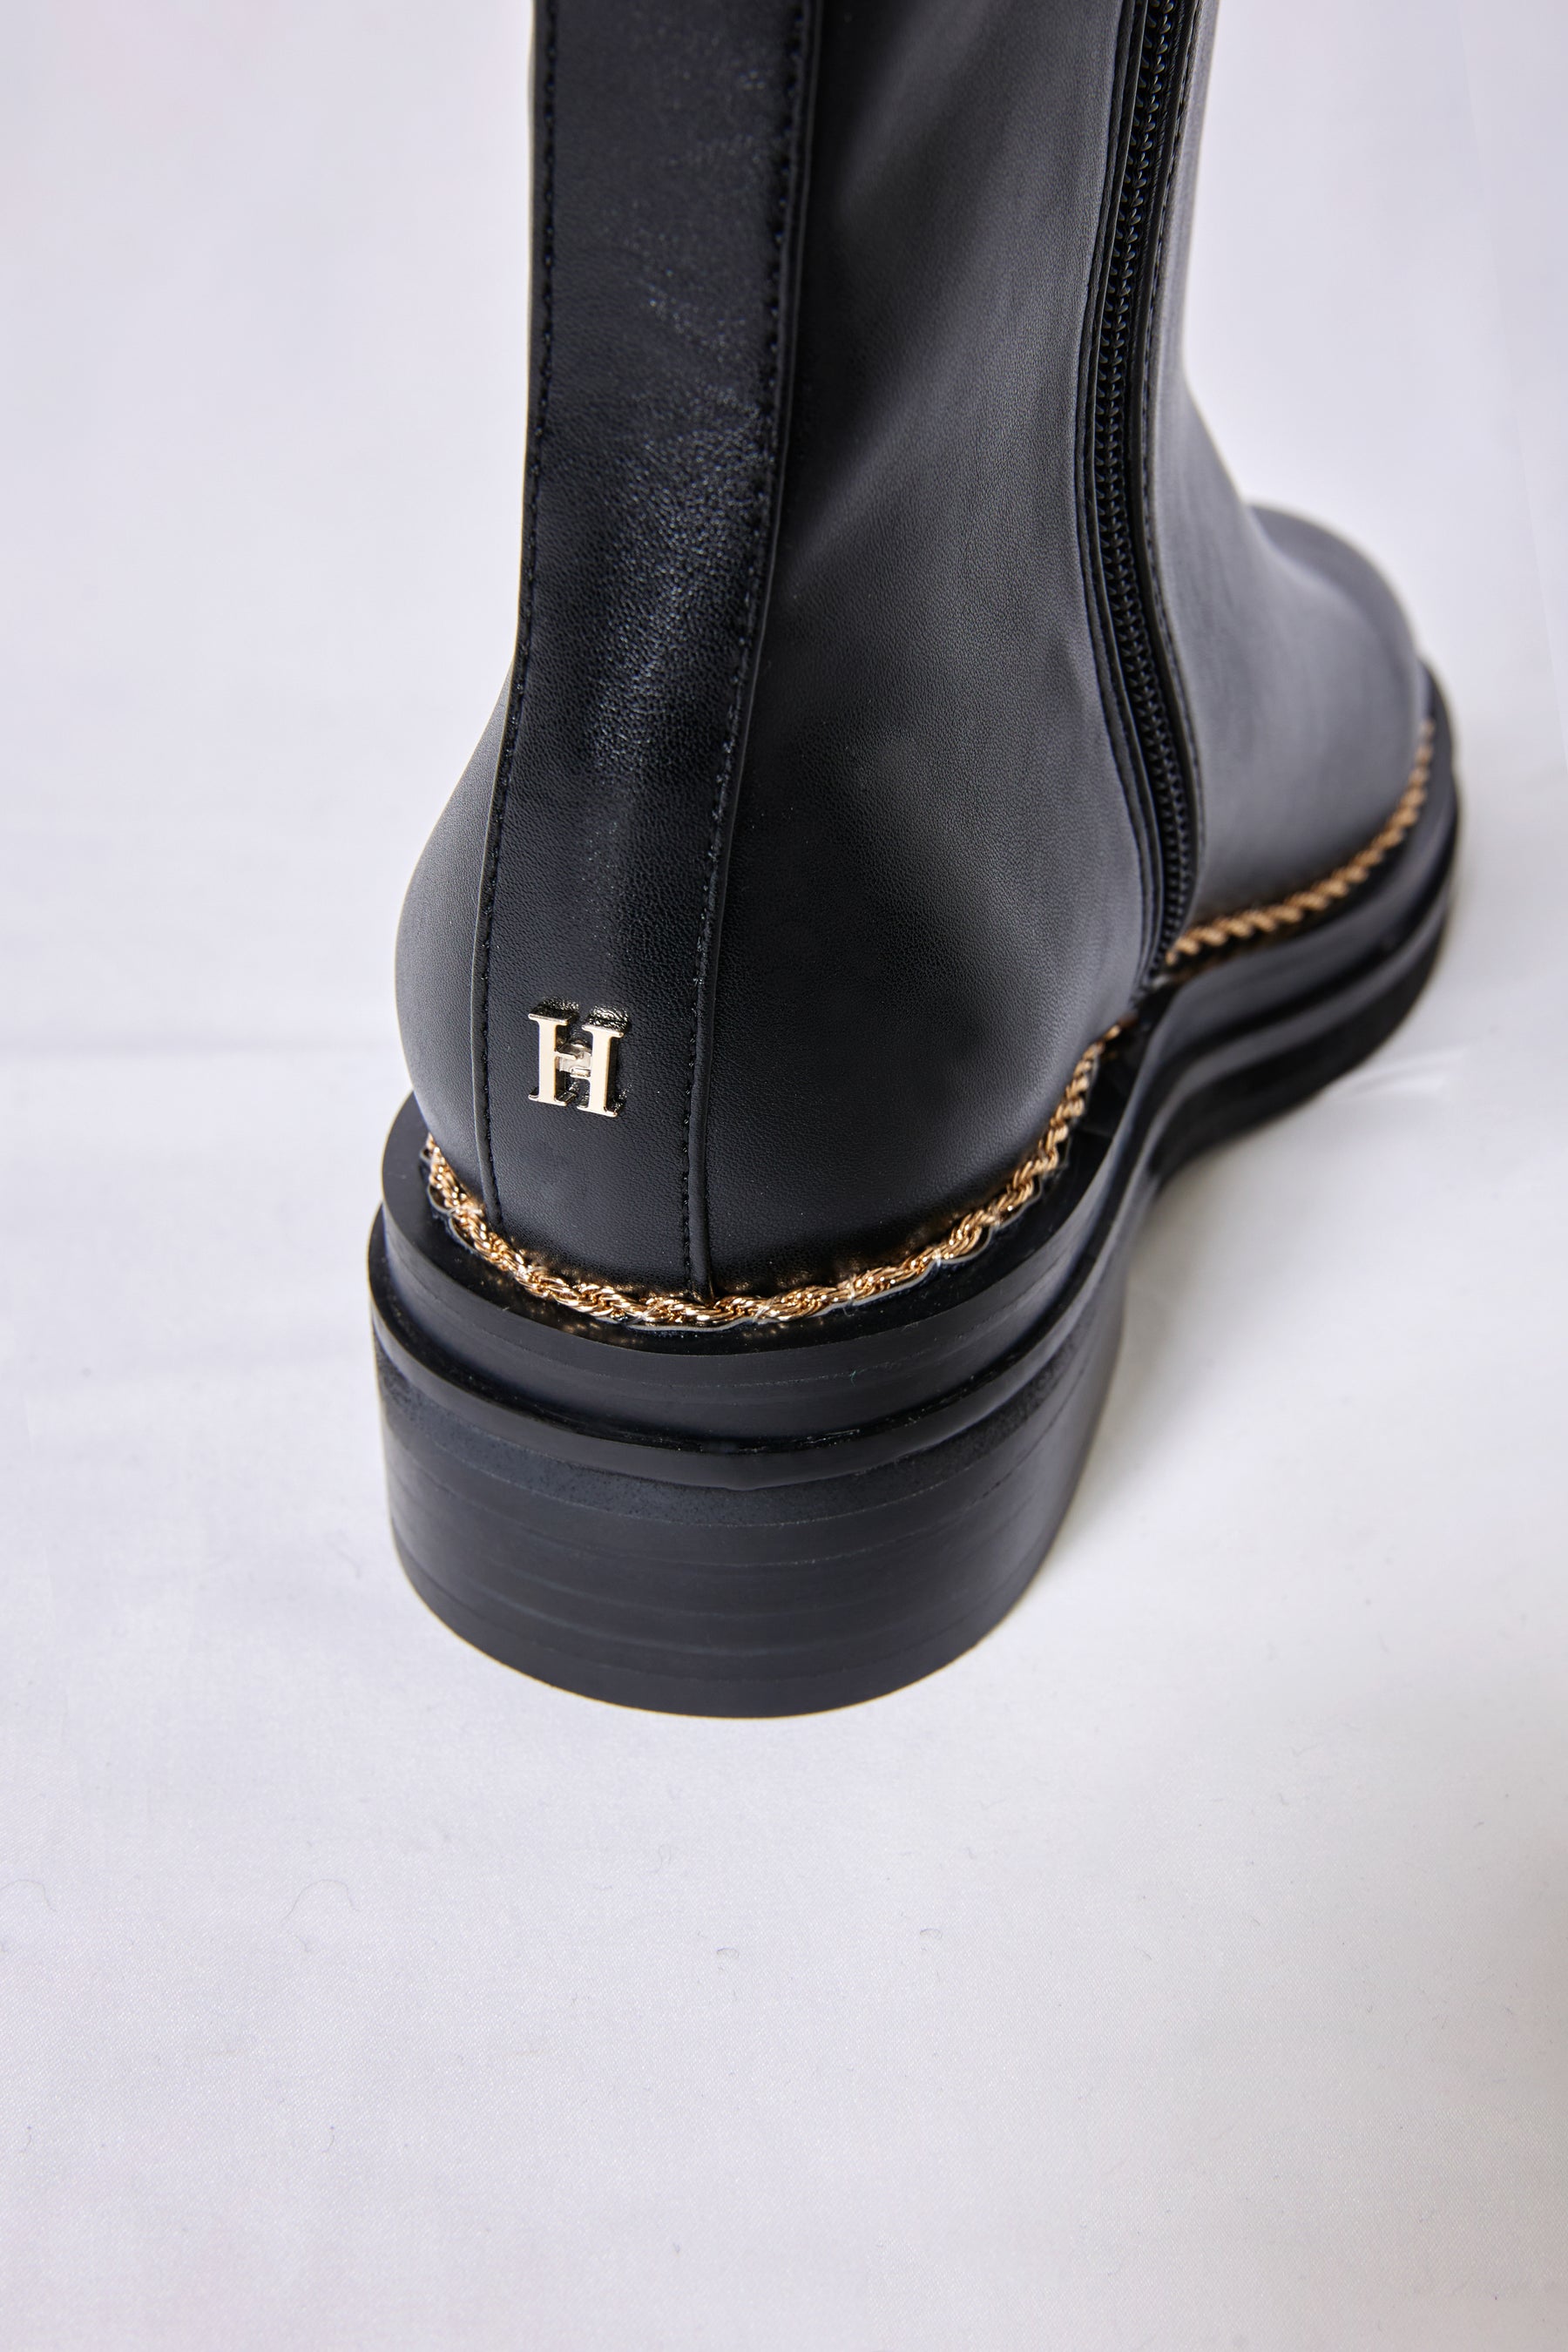 Chelsea Chain Ankle Boots 36 Her lip to243